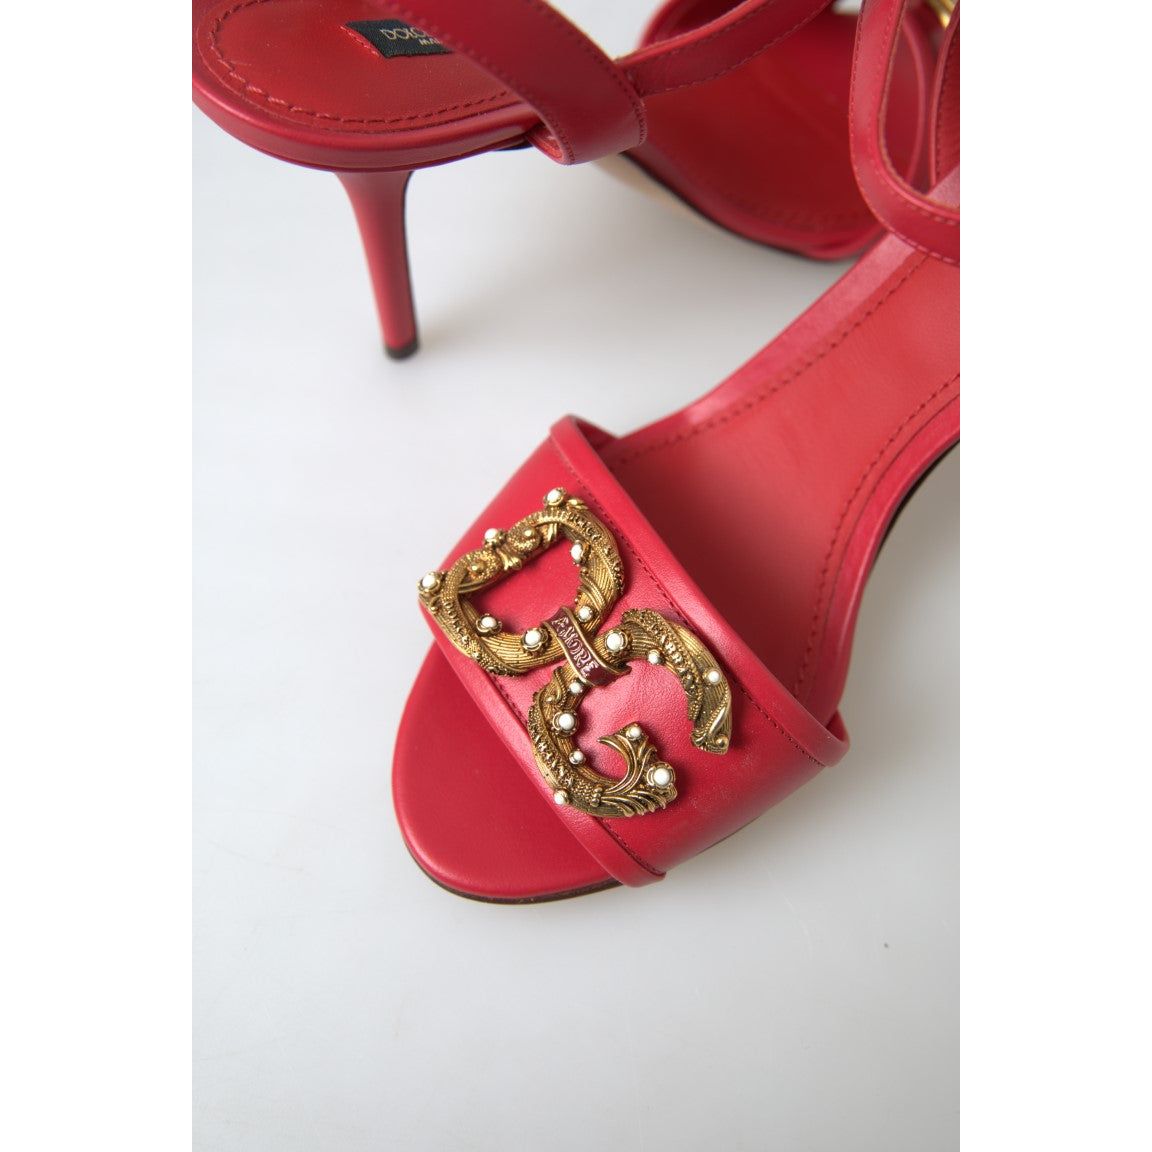 Dolce & Gabbana Red Stiletto Sandal Heels red-ankle-strap-stiletto-heels-sandals-shoes